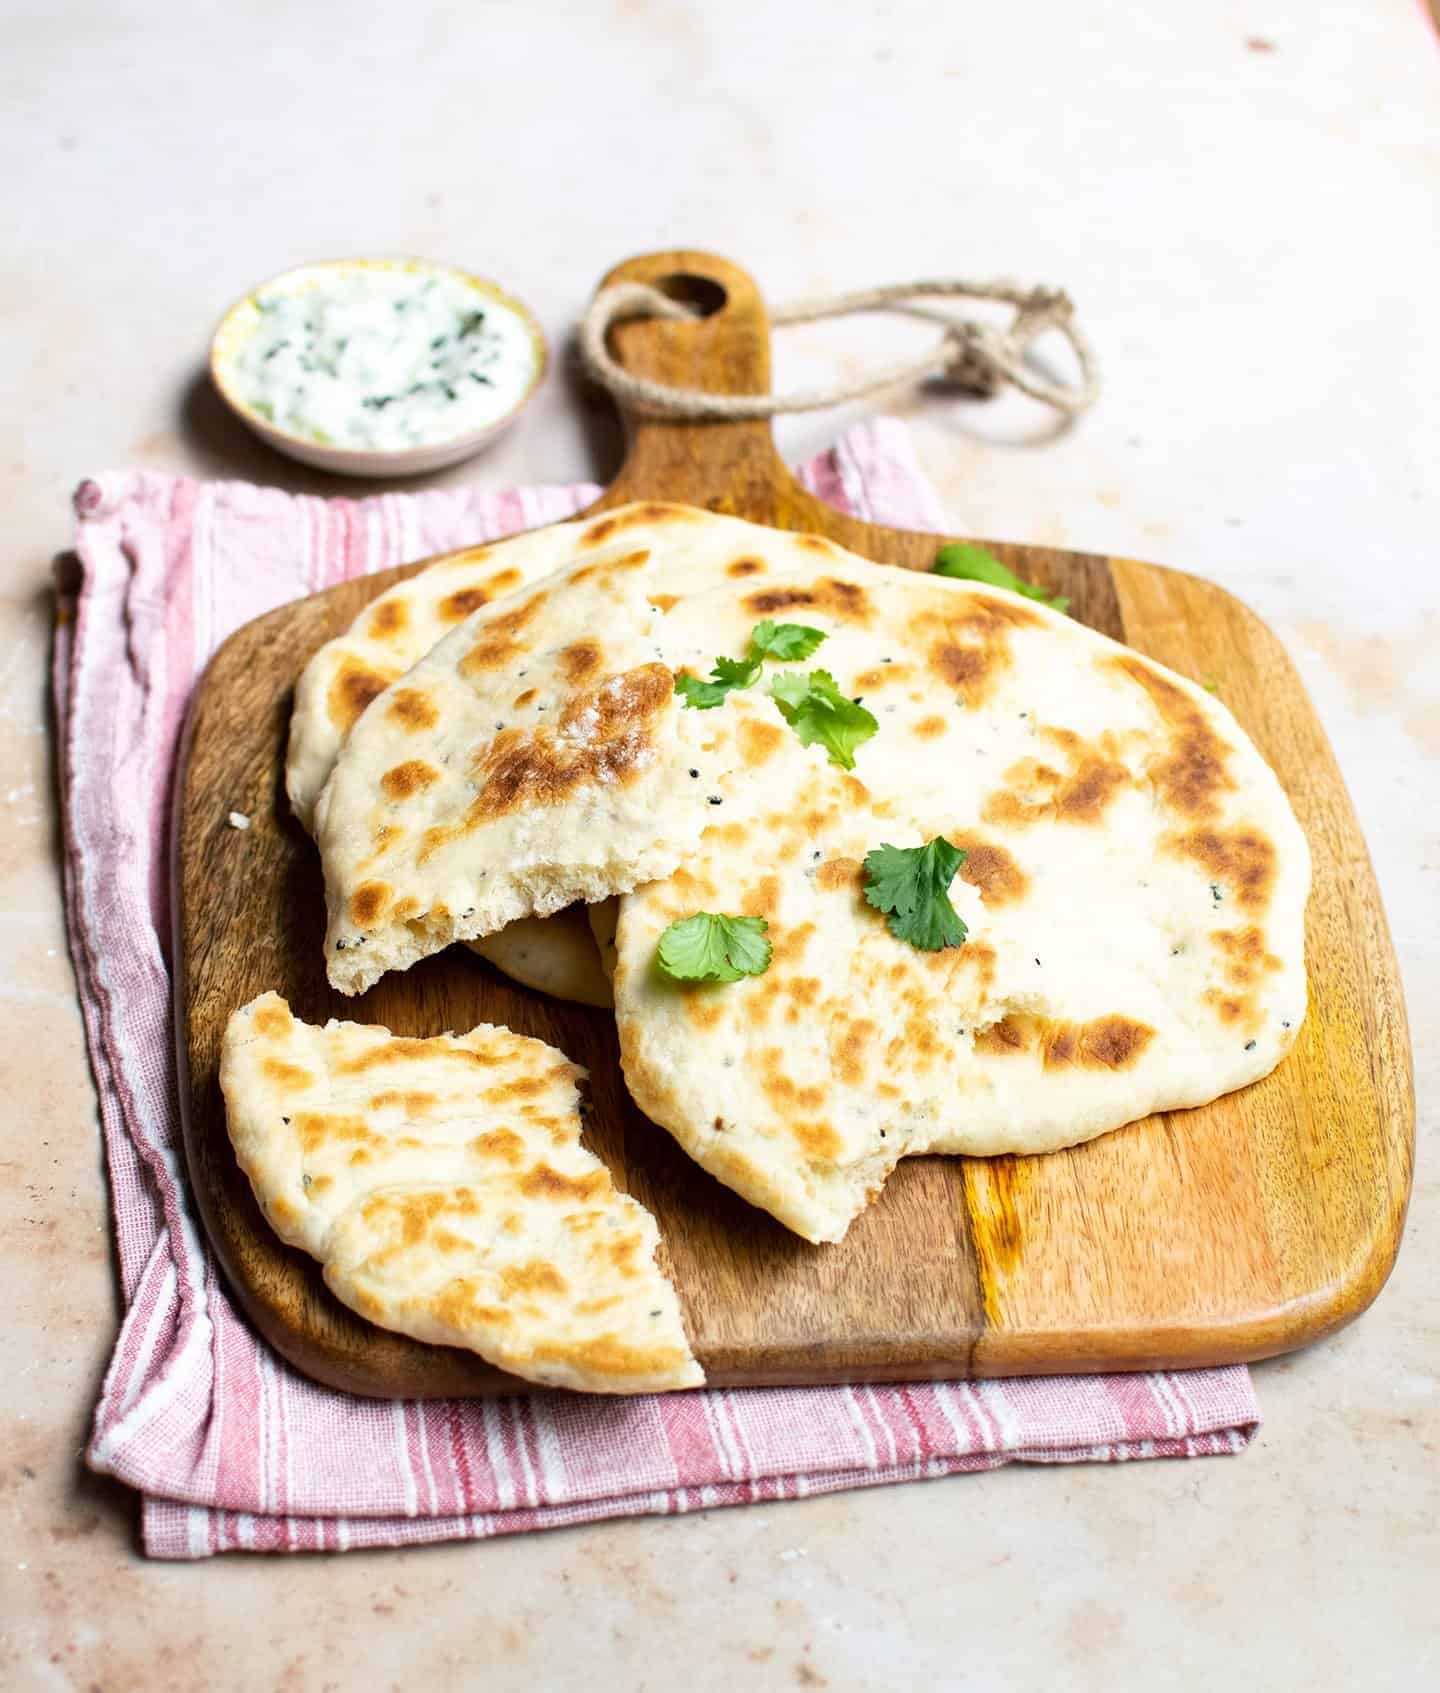 Naan bread on a wooden chopping board with a pink cloth underneath and raita in the background